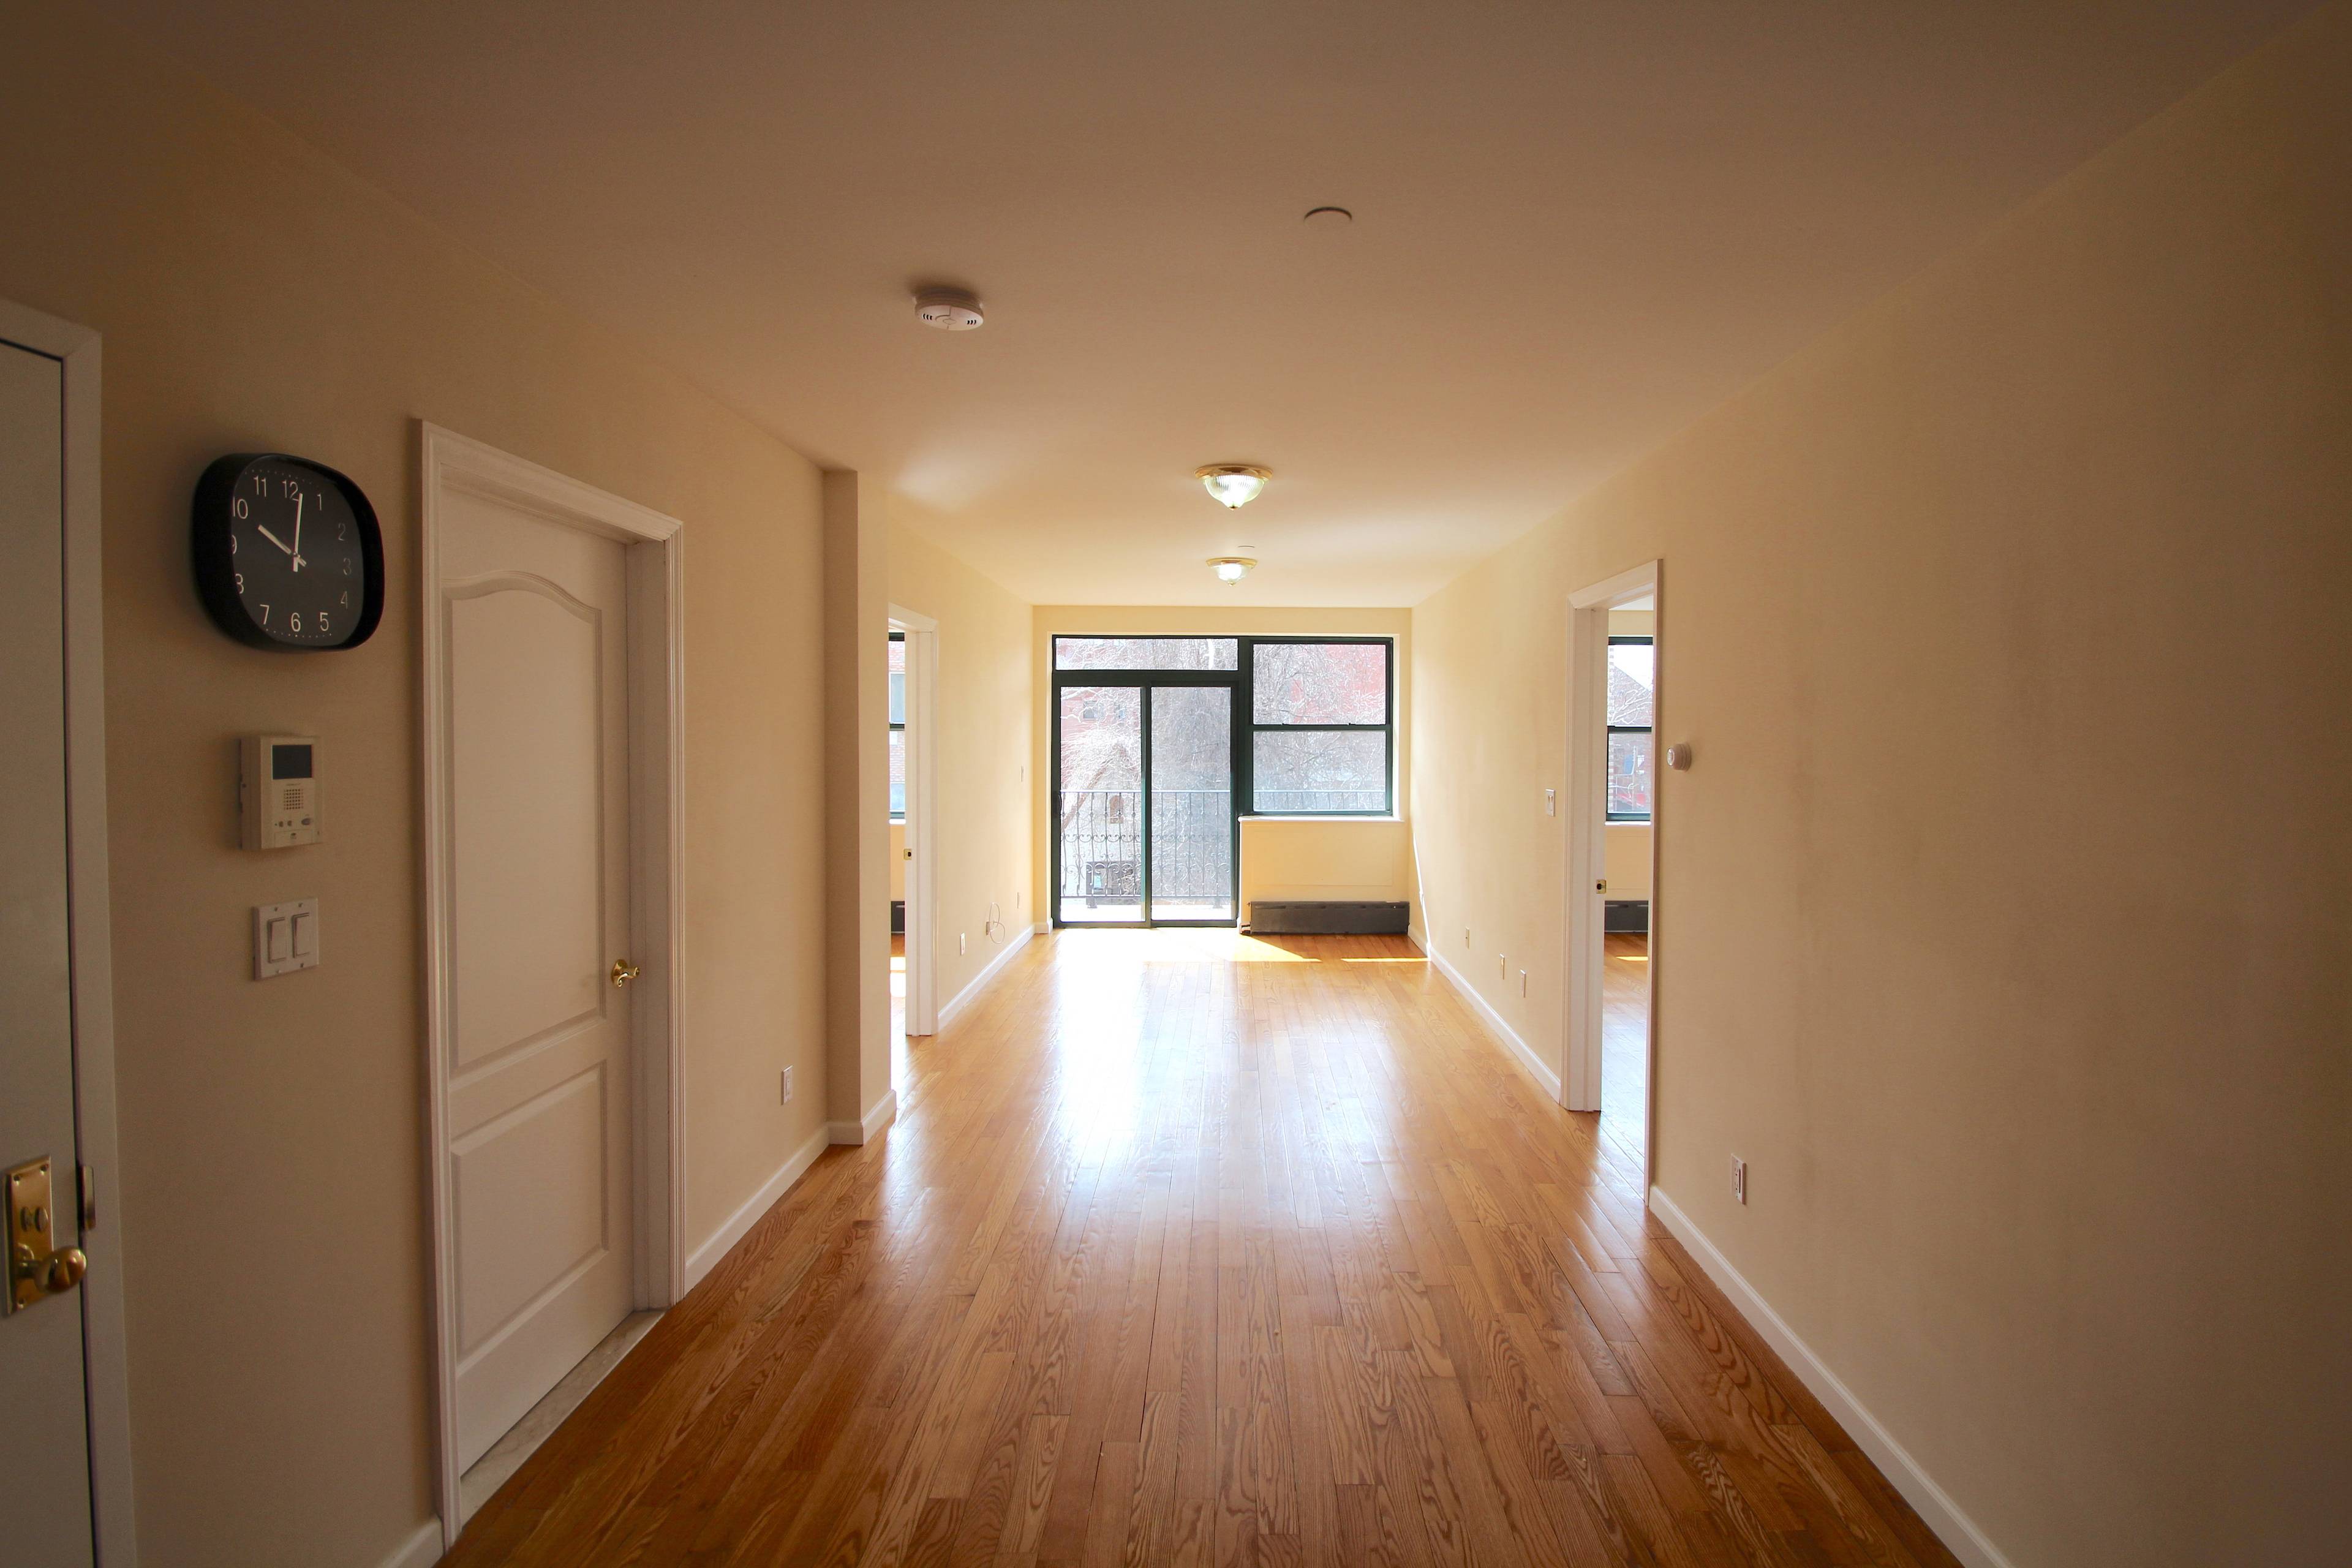 Briarwood, Queens: Luxury 2 Bed 2 Bath with Washer/Dryer in Elevator Building + Available Parking!